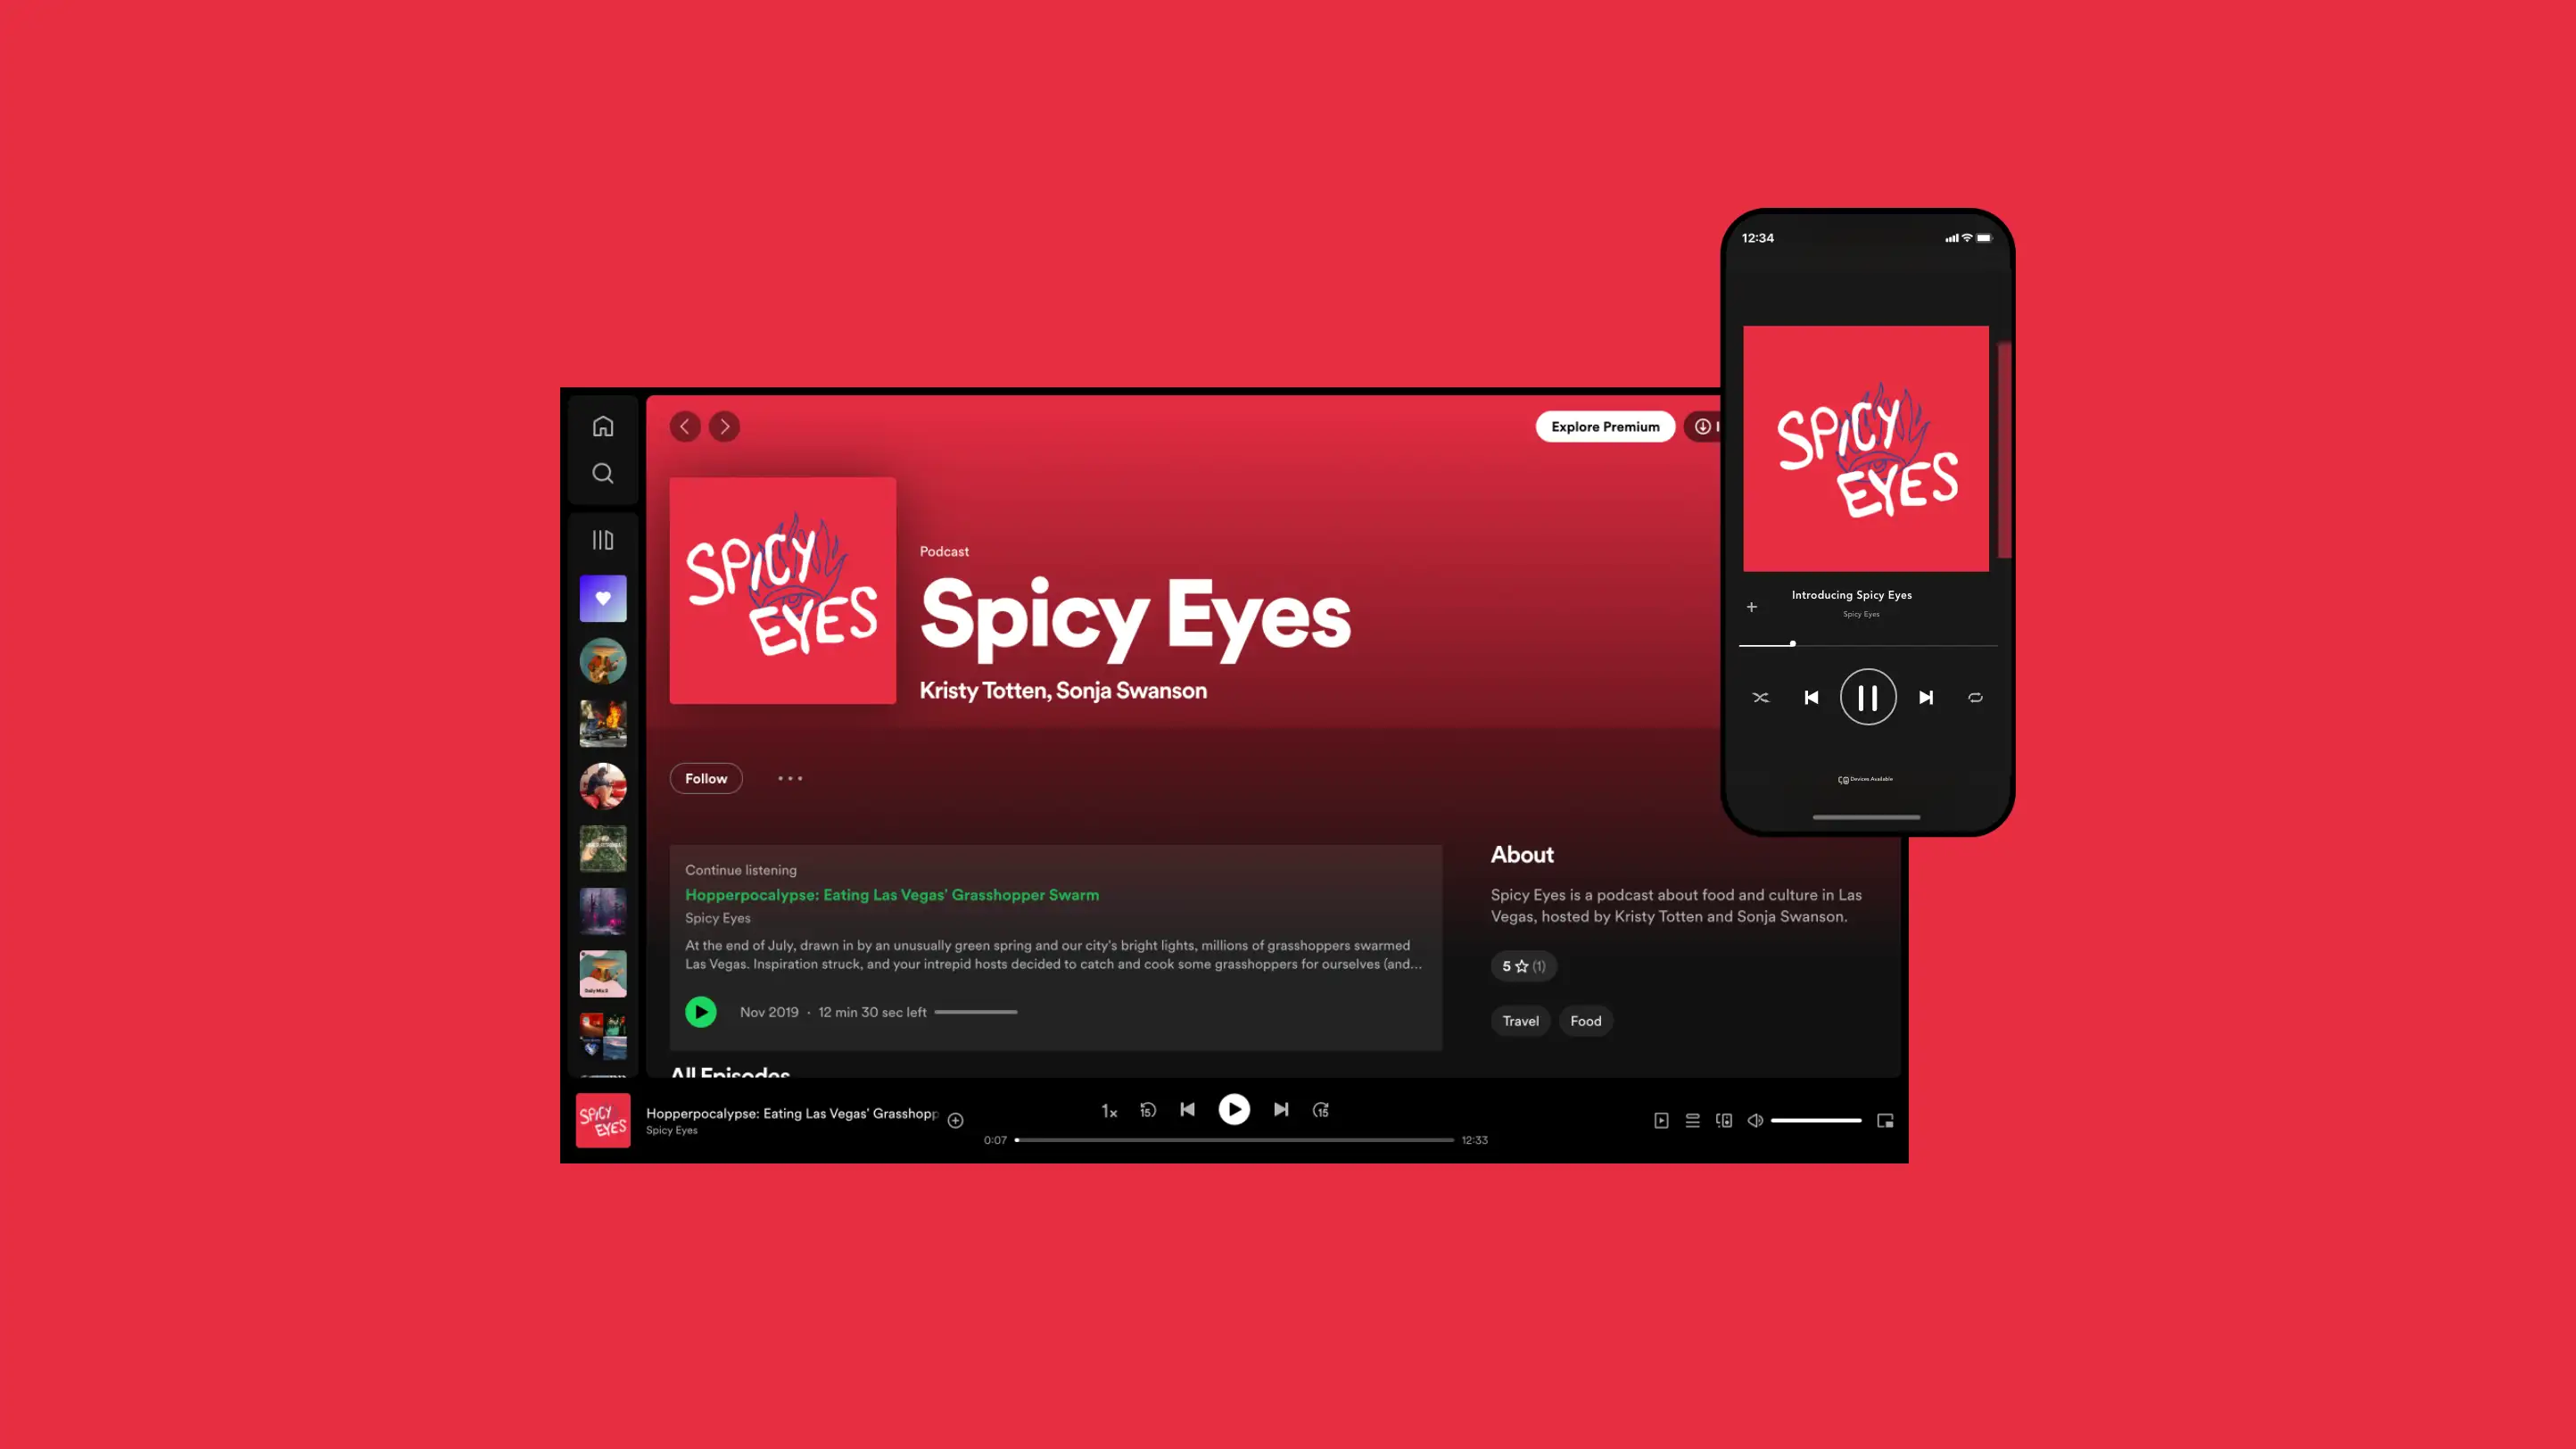 Spicy Eyes Spotify podcast screens.